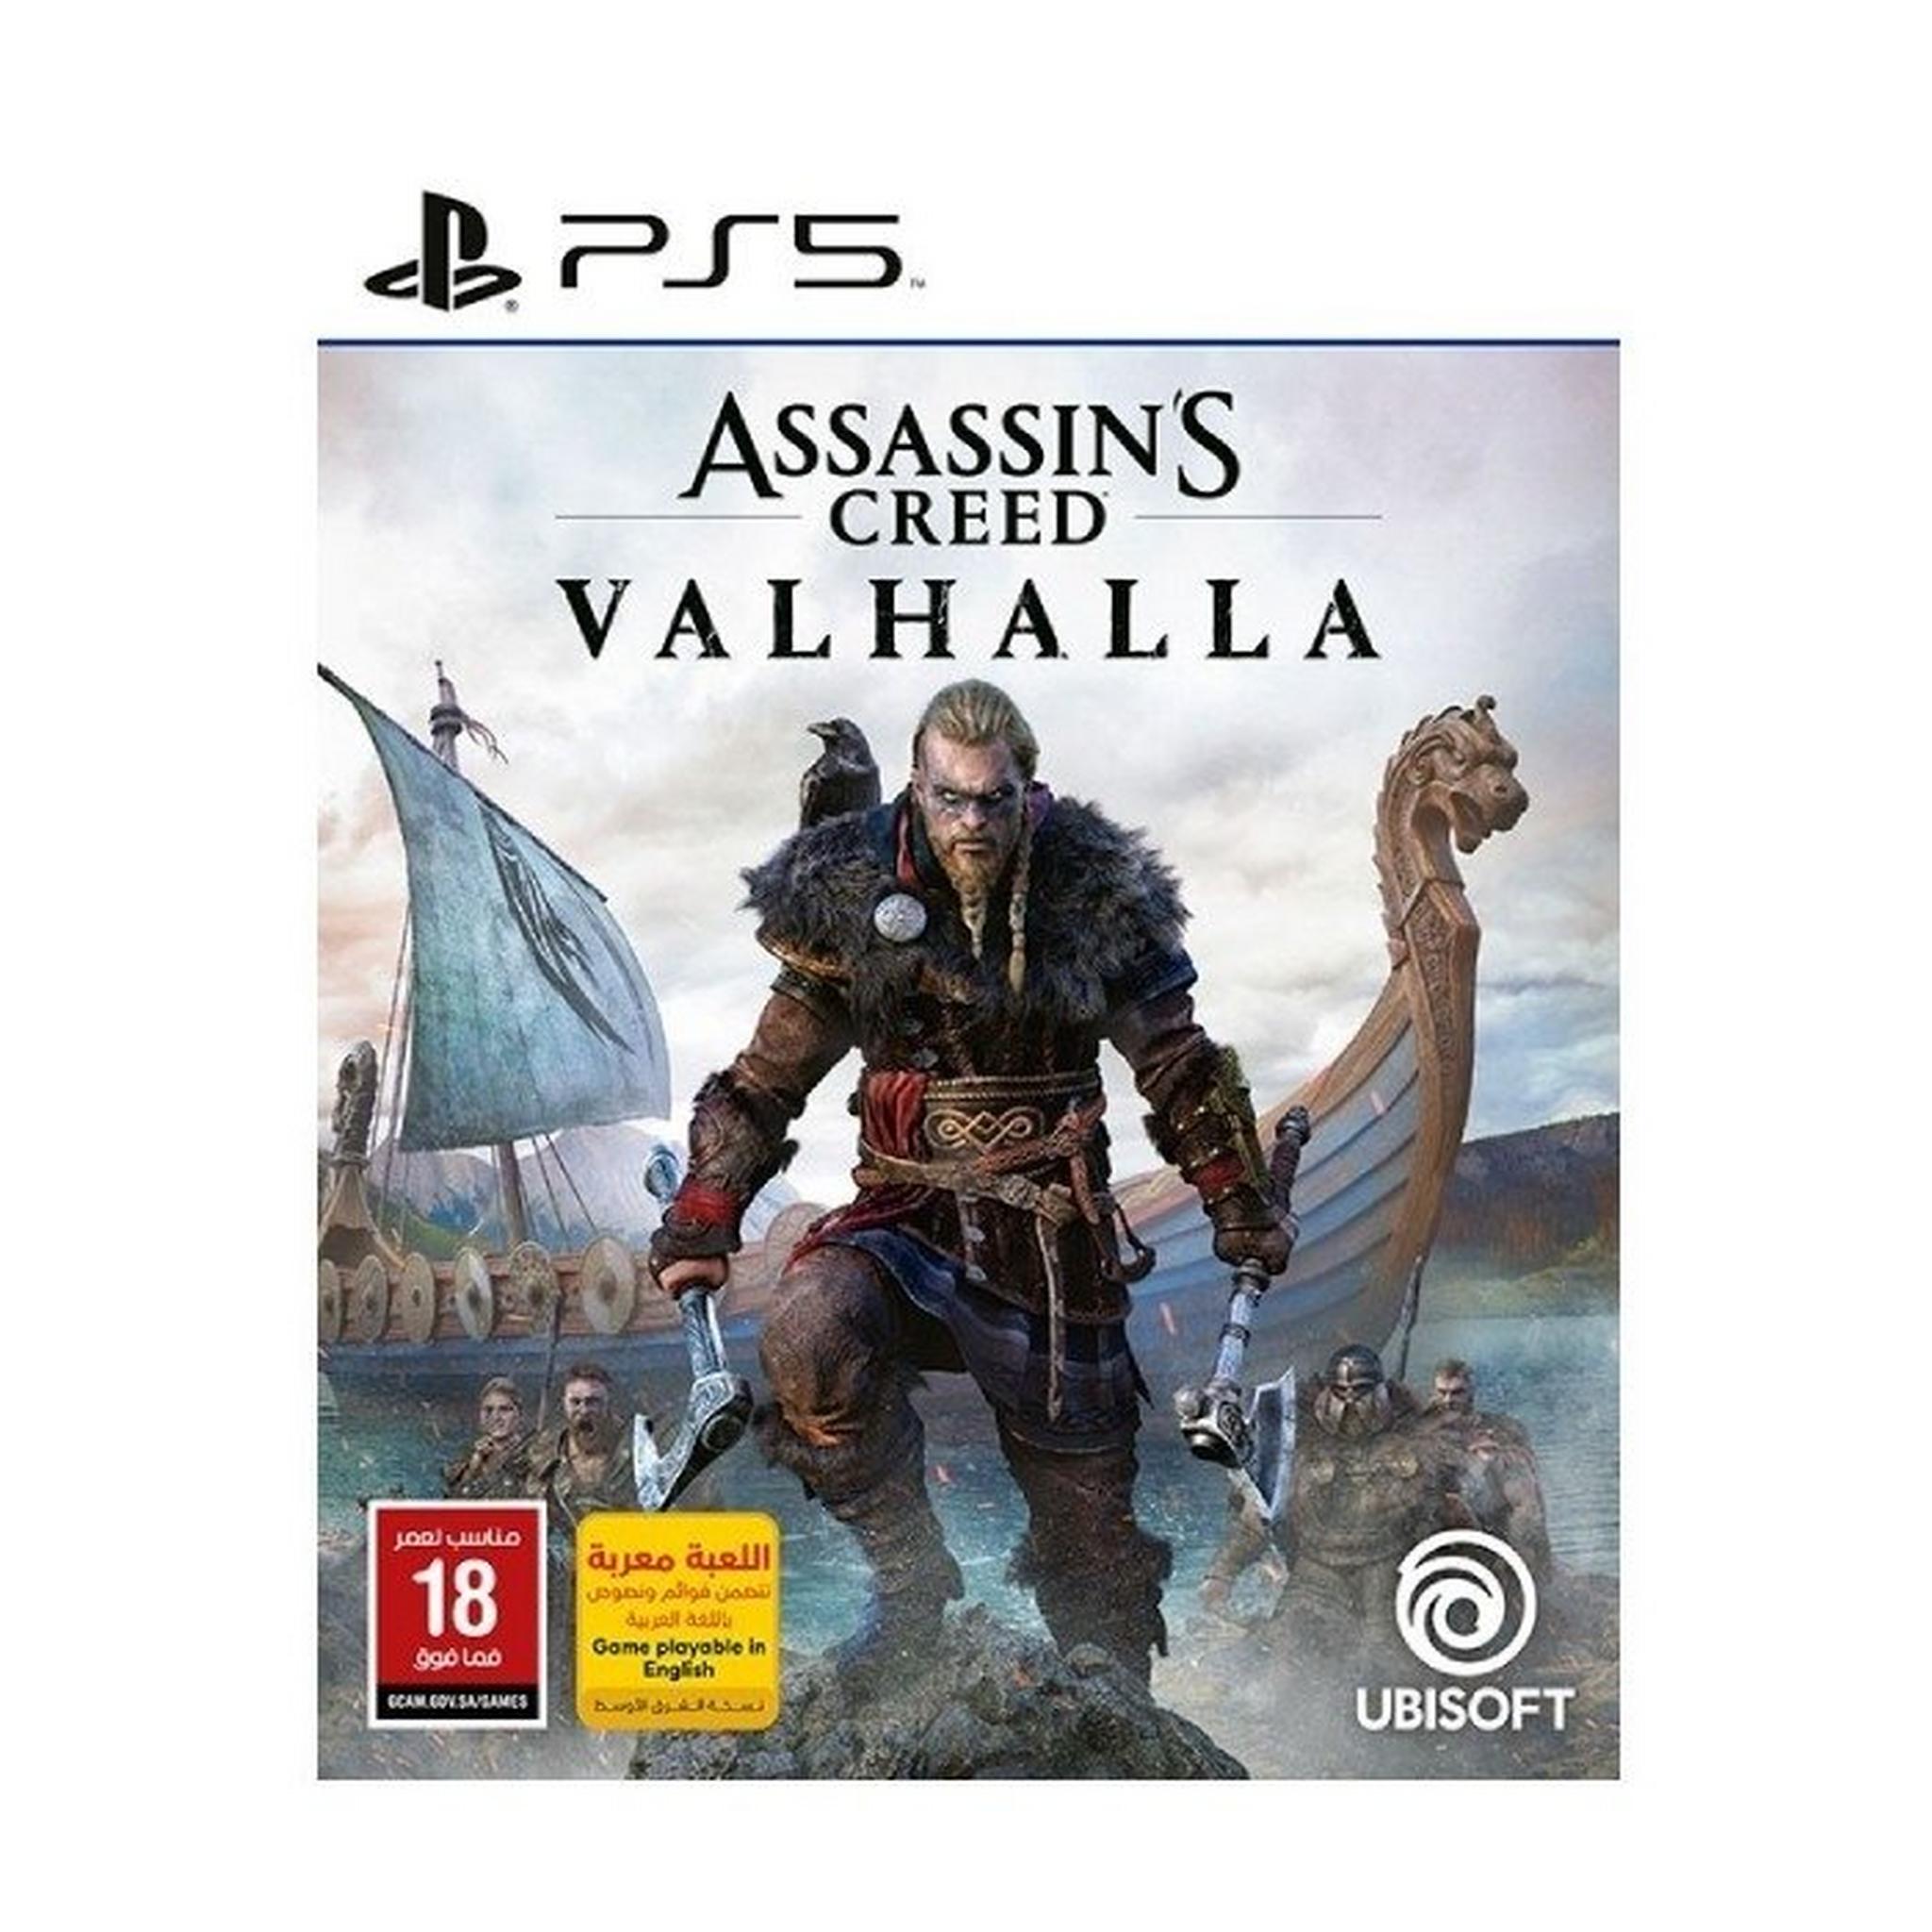 Assassin's Creed Valhalla - PS5 Game